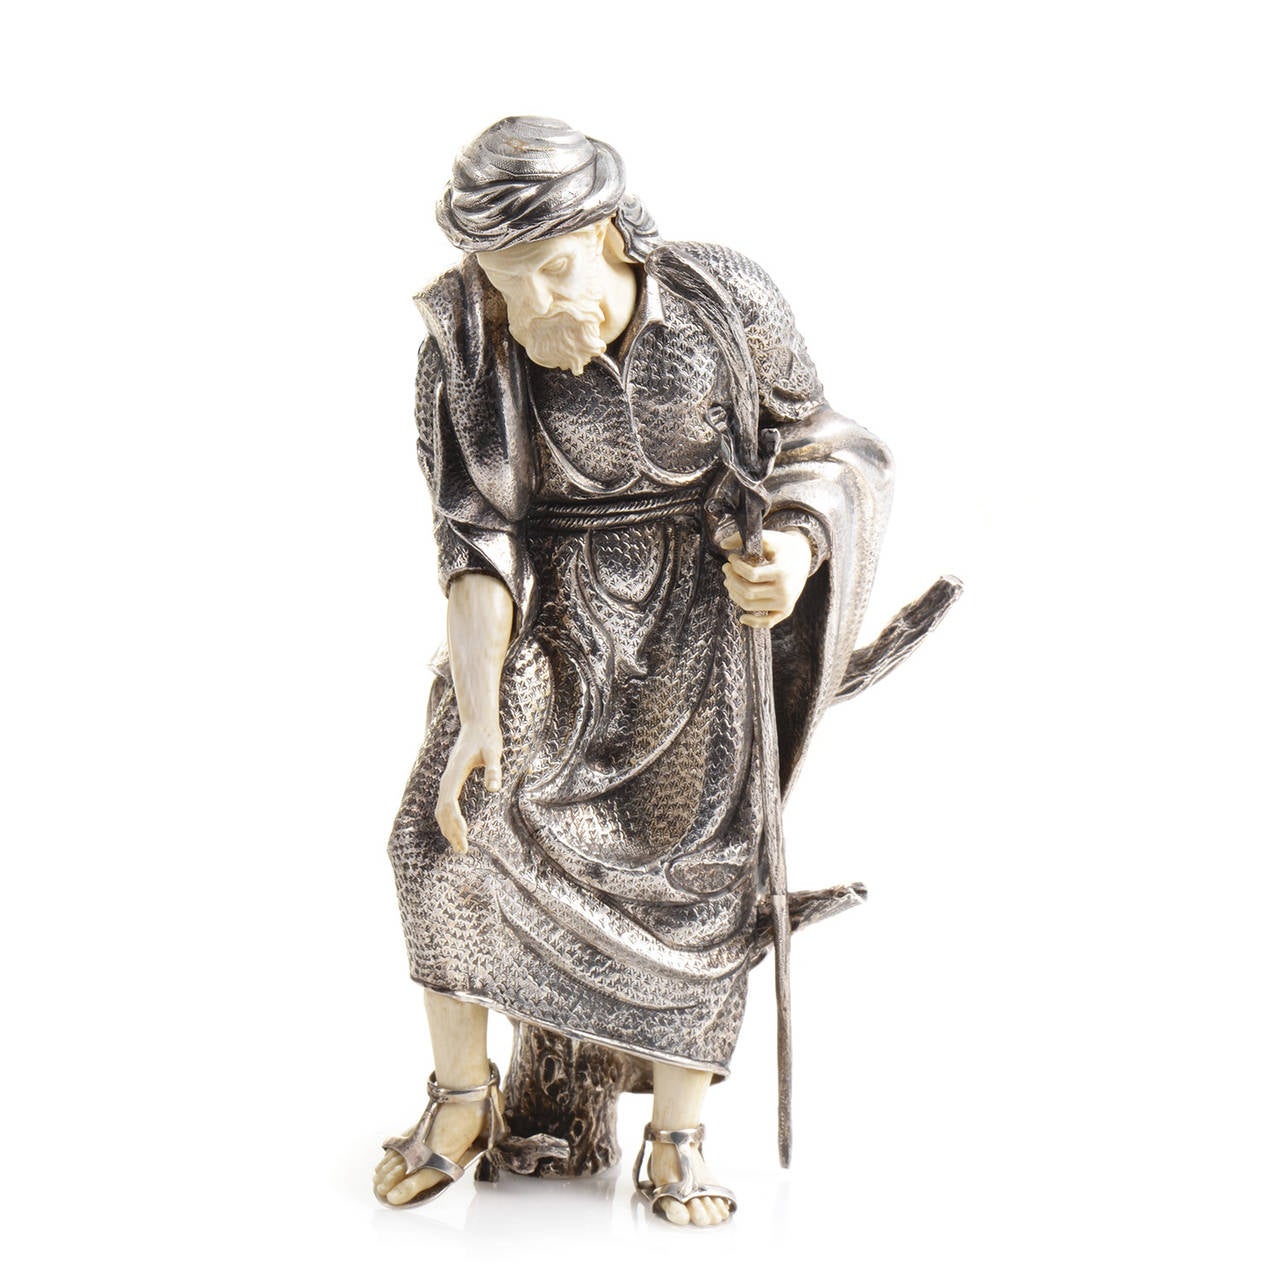 This statue set created by Spanish artist Shamish is perfect for your holiday Nativity scene. The set is made of sterling silver and boasts a figurine of Joseph with a walking staff, Mary with baby Jesus, The angel Gabriel, and a tree.